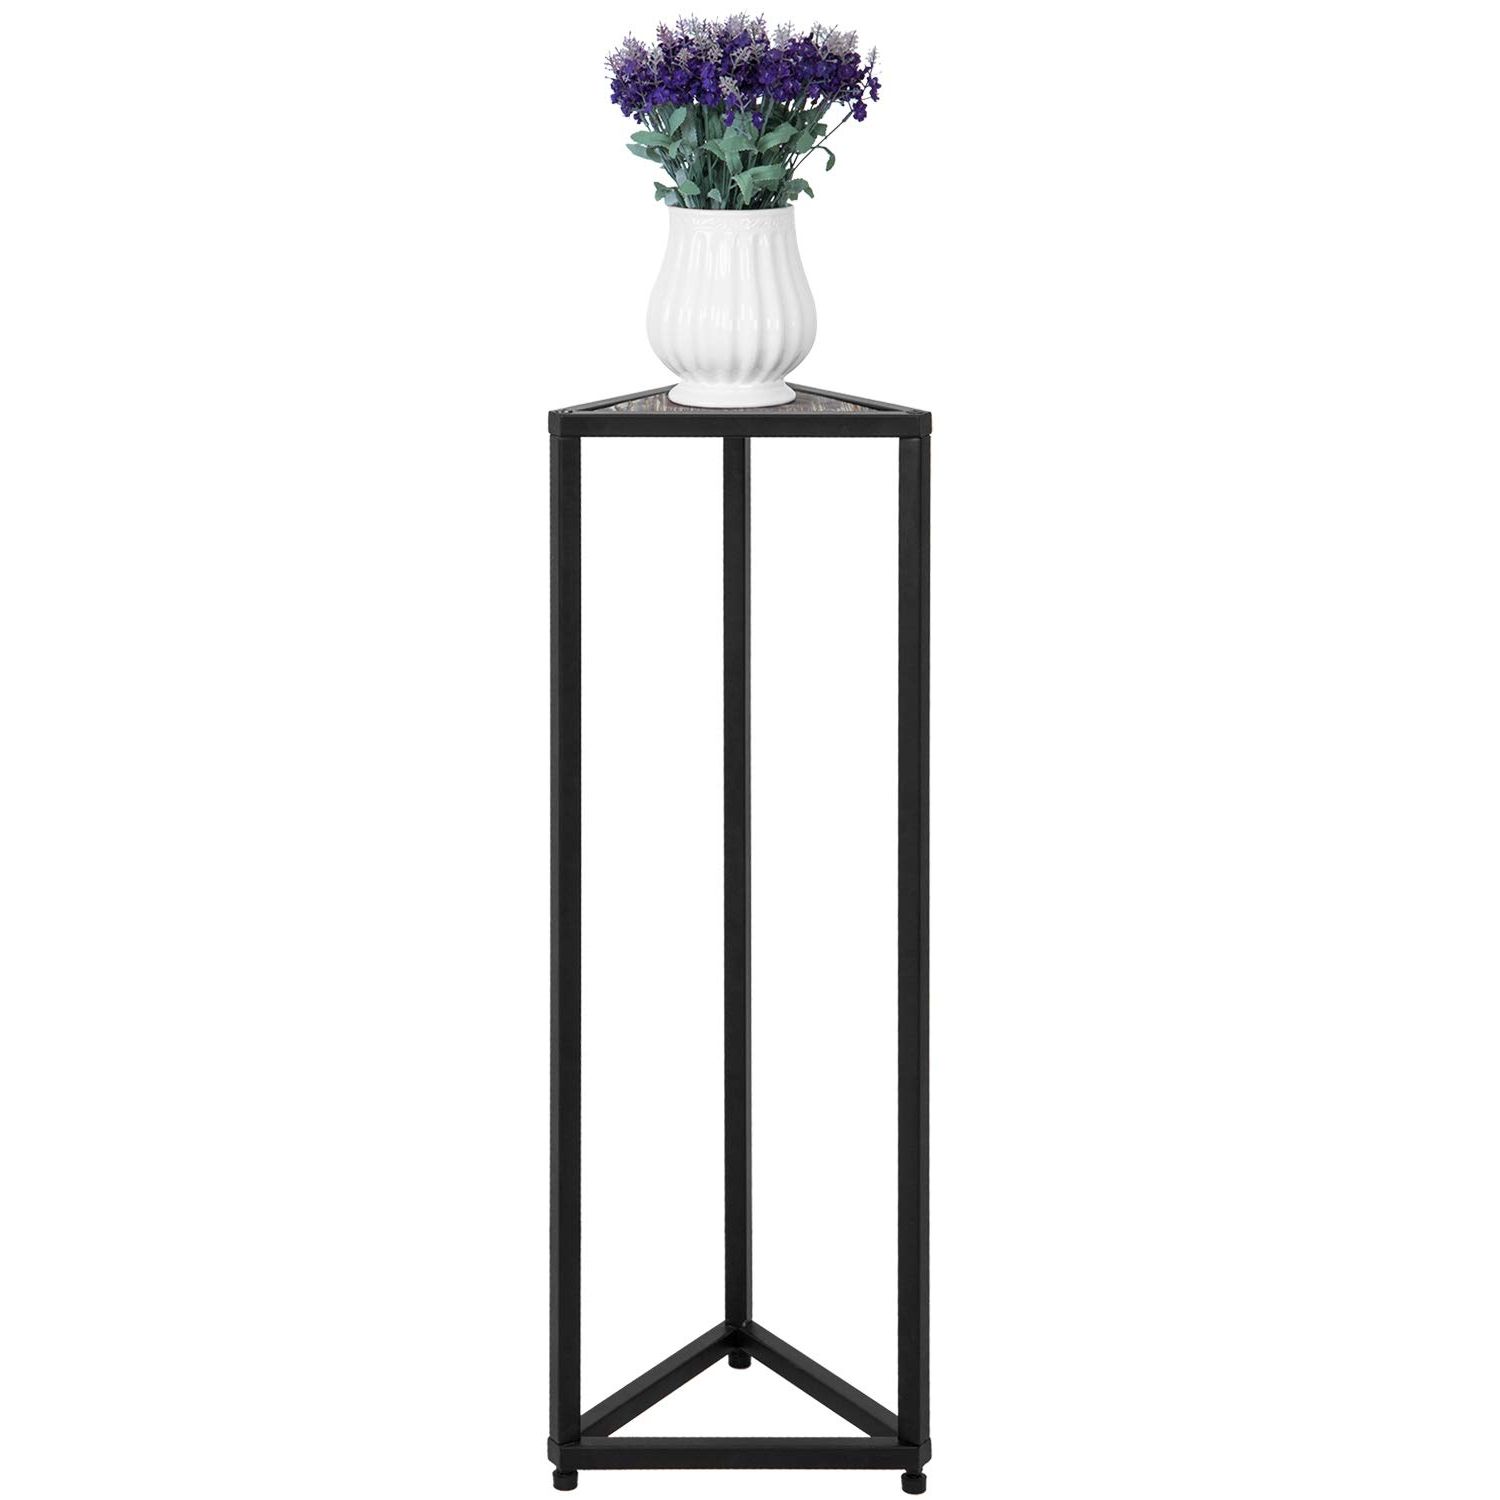 Current Mygift 36 Inch Triangular Plant Stand – Modern Torched Wood And Black Metal  Frame Flower Rack Potted Plant Pedestal Holder, Rustic Farmhouse Corner  Accent Table Throughout 36 Inch Plant Stands (View 2 of 10)